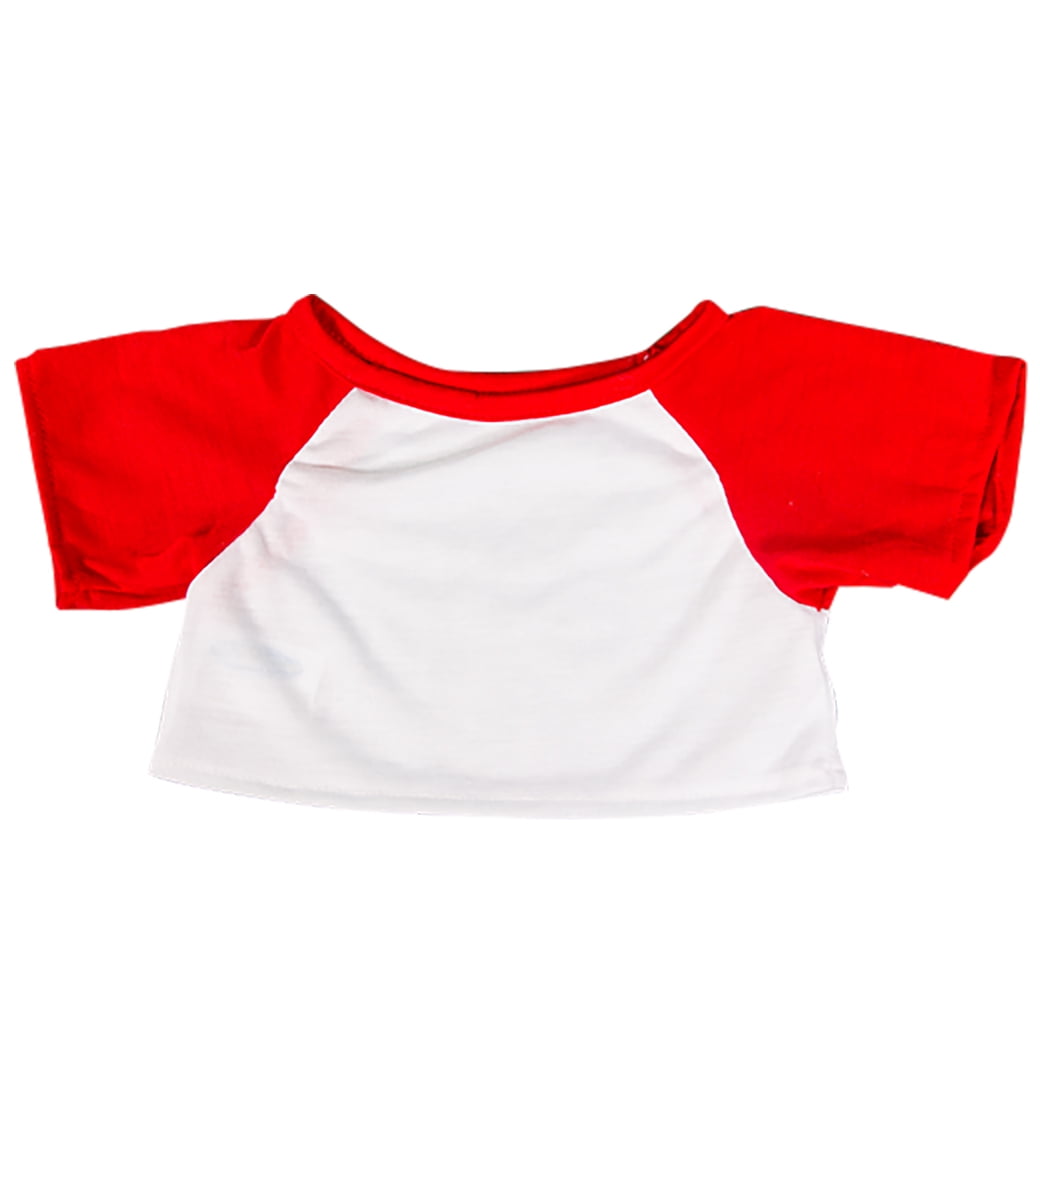 Red T-Shirt Outfit Teddy Bear Clothes Fits Most 14"-18" Build-a-bear and Make Yo 